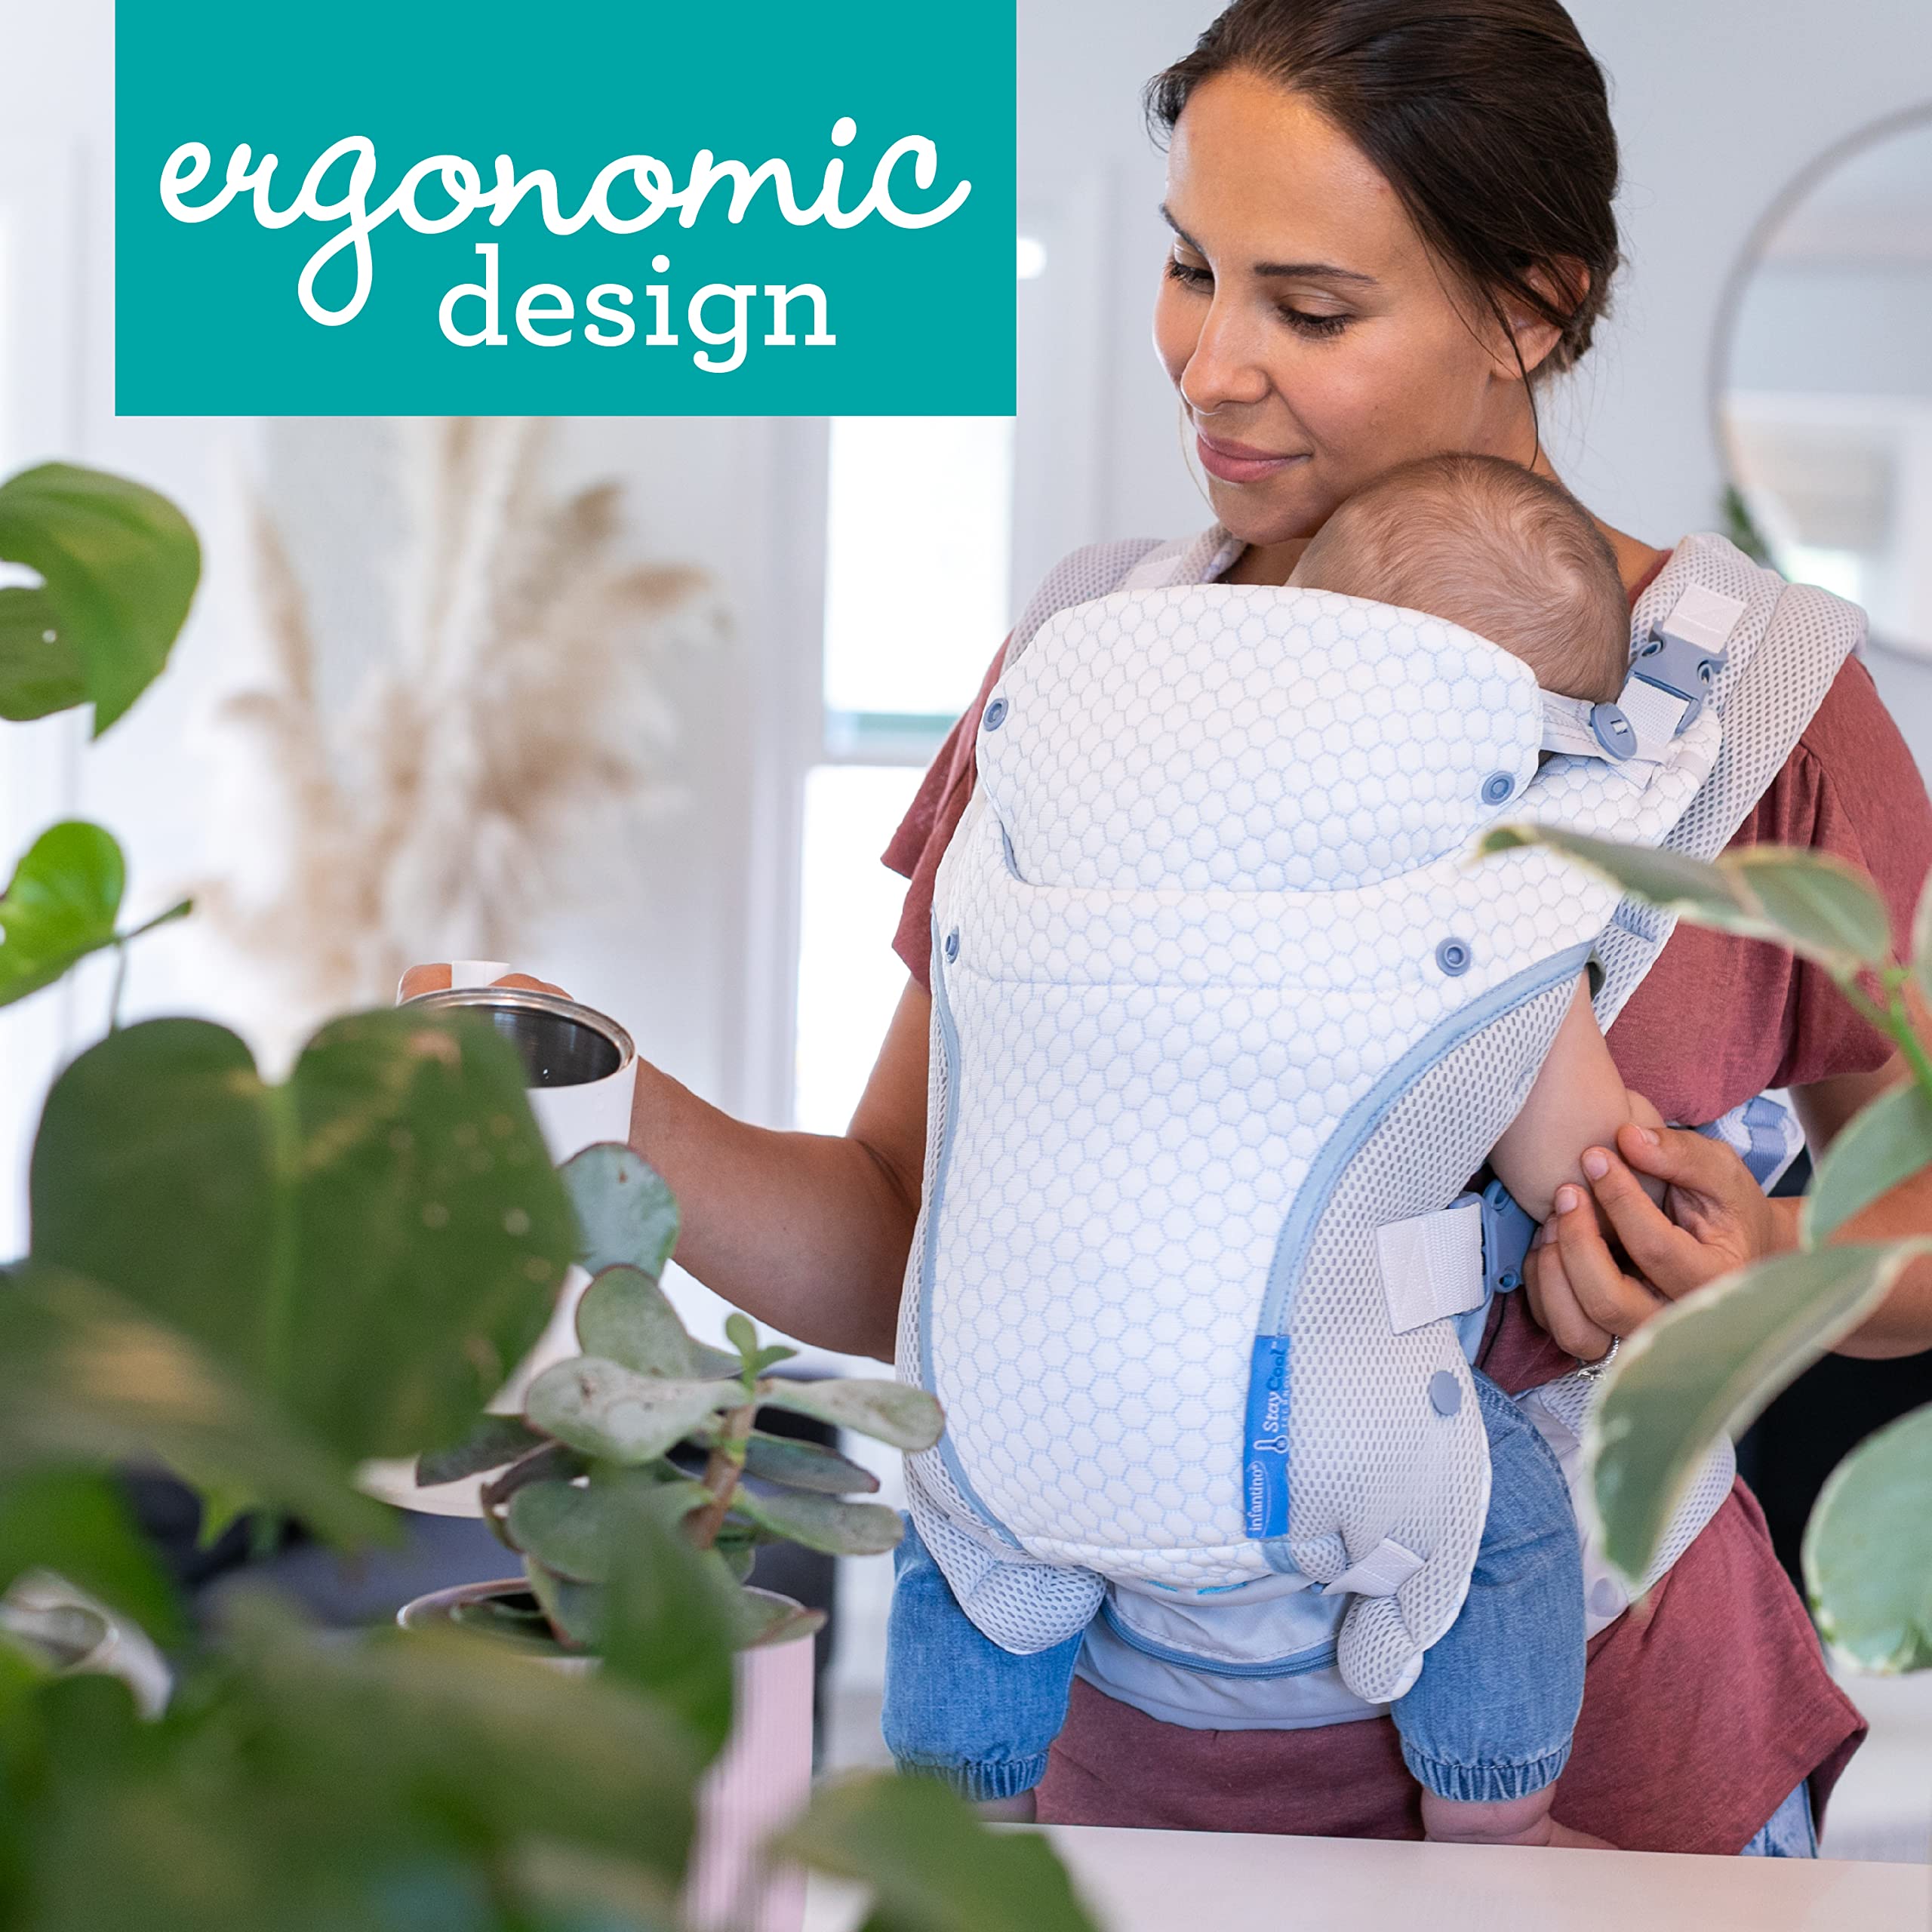 Infantino Staycool 4-in-1 Convertible Carrier, Ergonomic Design for Infant and Toddlers, 8-40 lbs with Storage Pocket, White